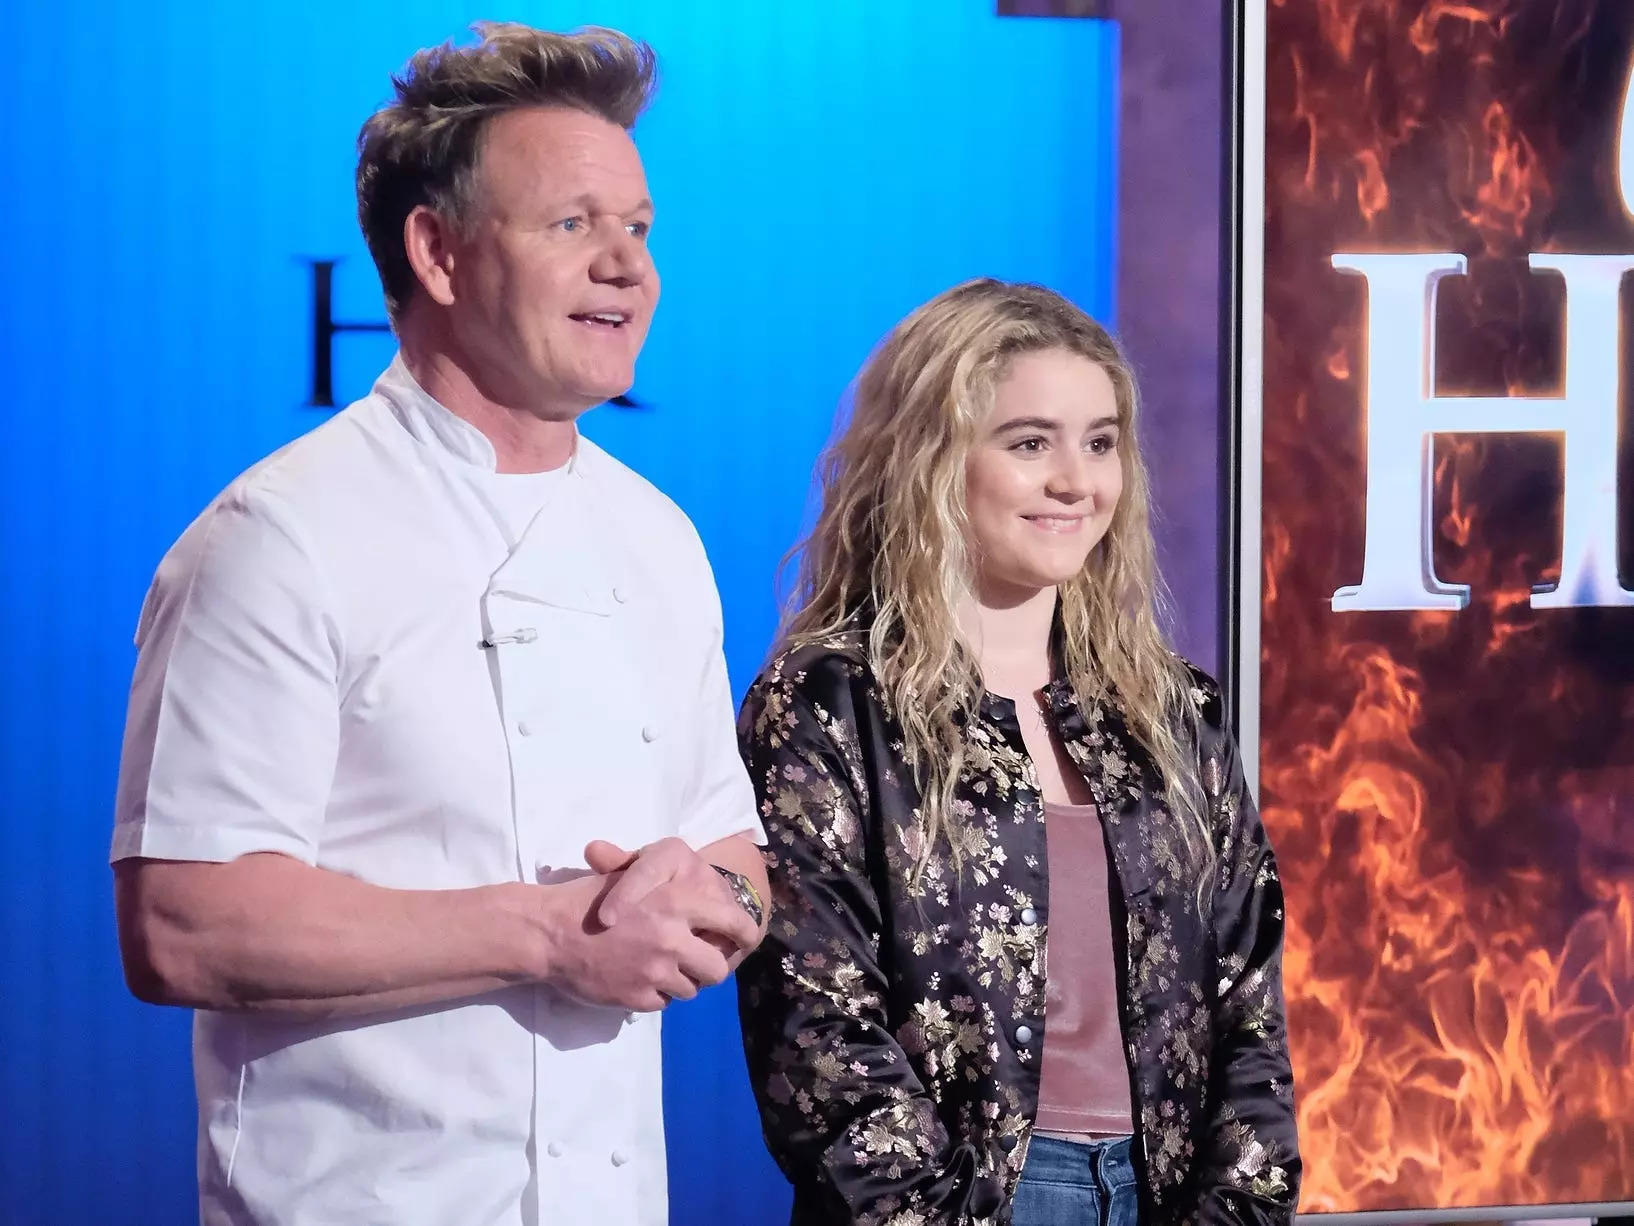 
Gordon Ramsay's daughter Tilly roasted her dad by rating his behavior on vacation in a viral TikTok
